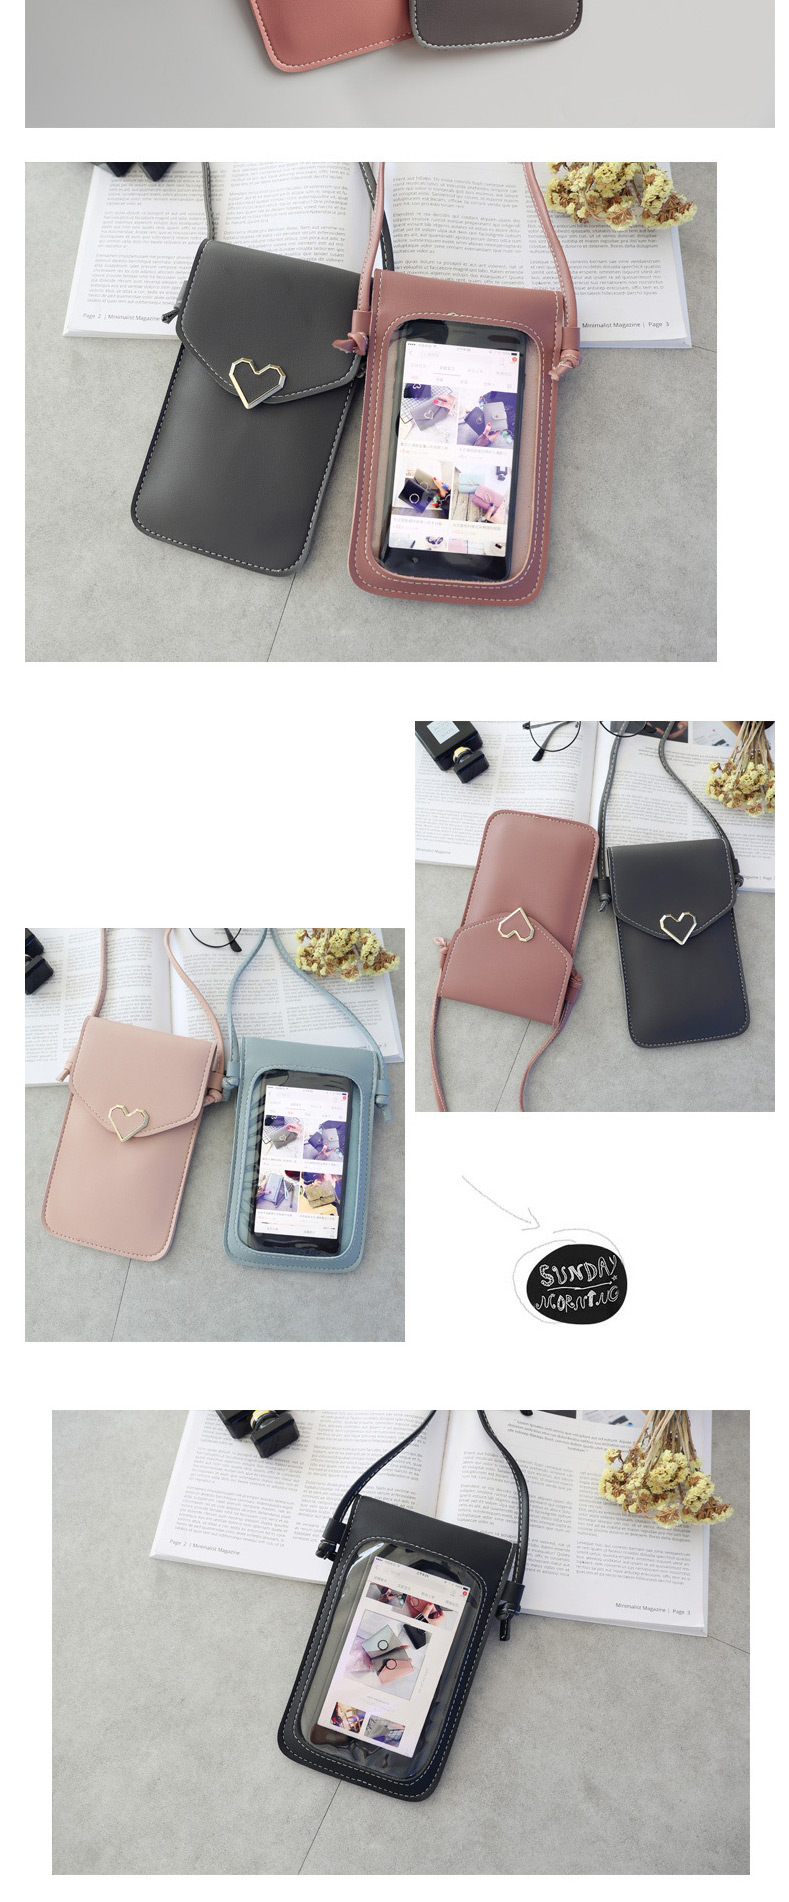 Fashion Light Pink Caring Metal Transparent Touch Screen Multifunctional Mobile Phone Bag,Shoulder bags